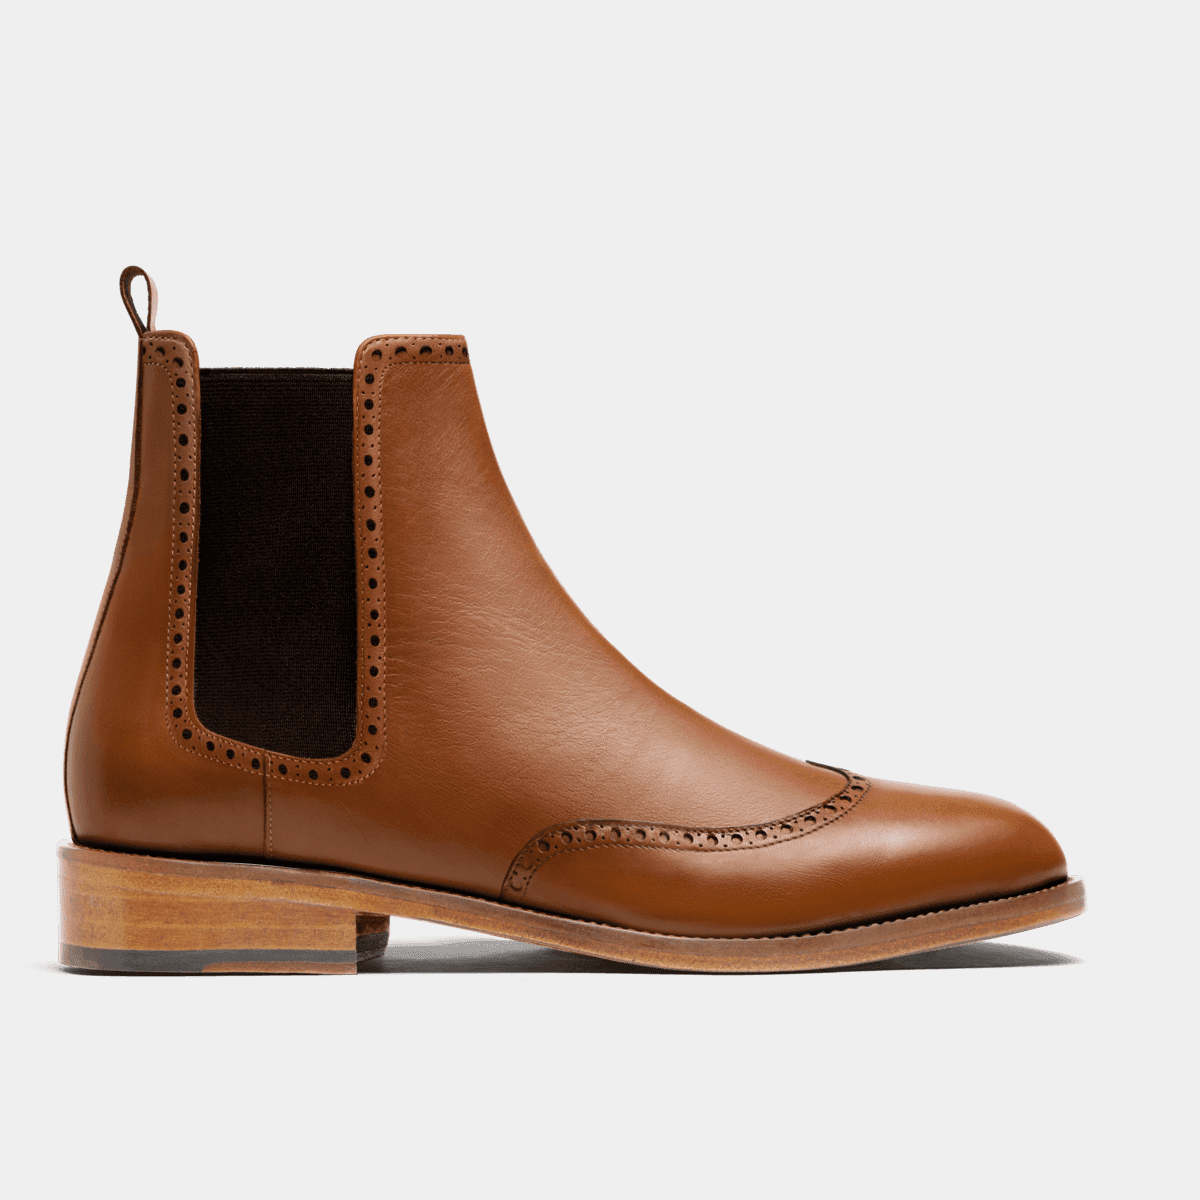 Women's Boots brown italian calf leather | Sumissura